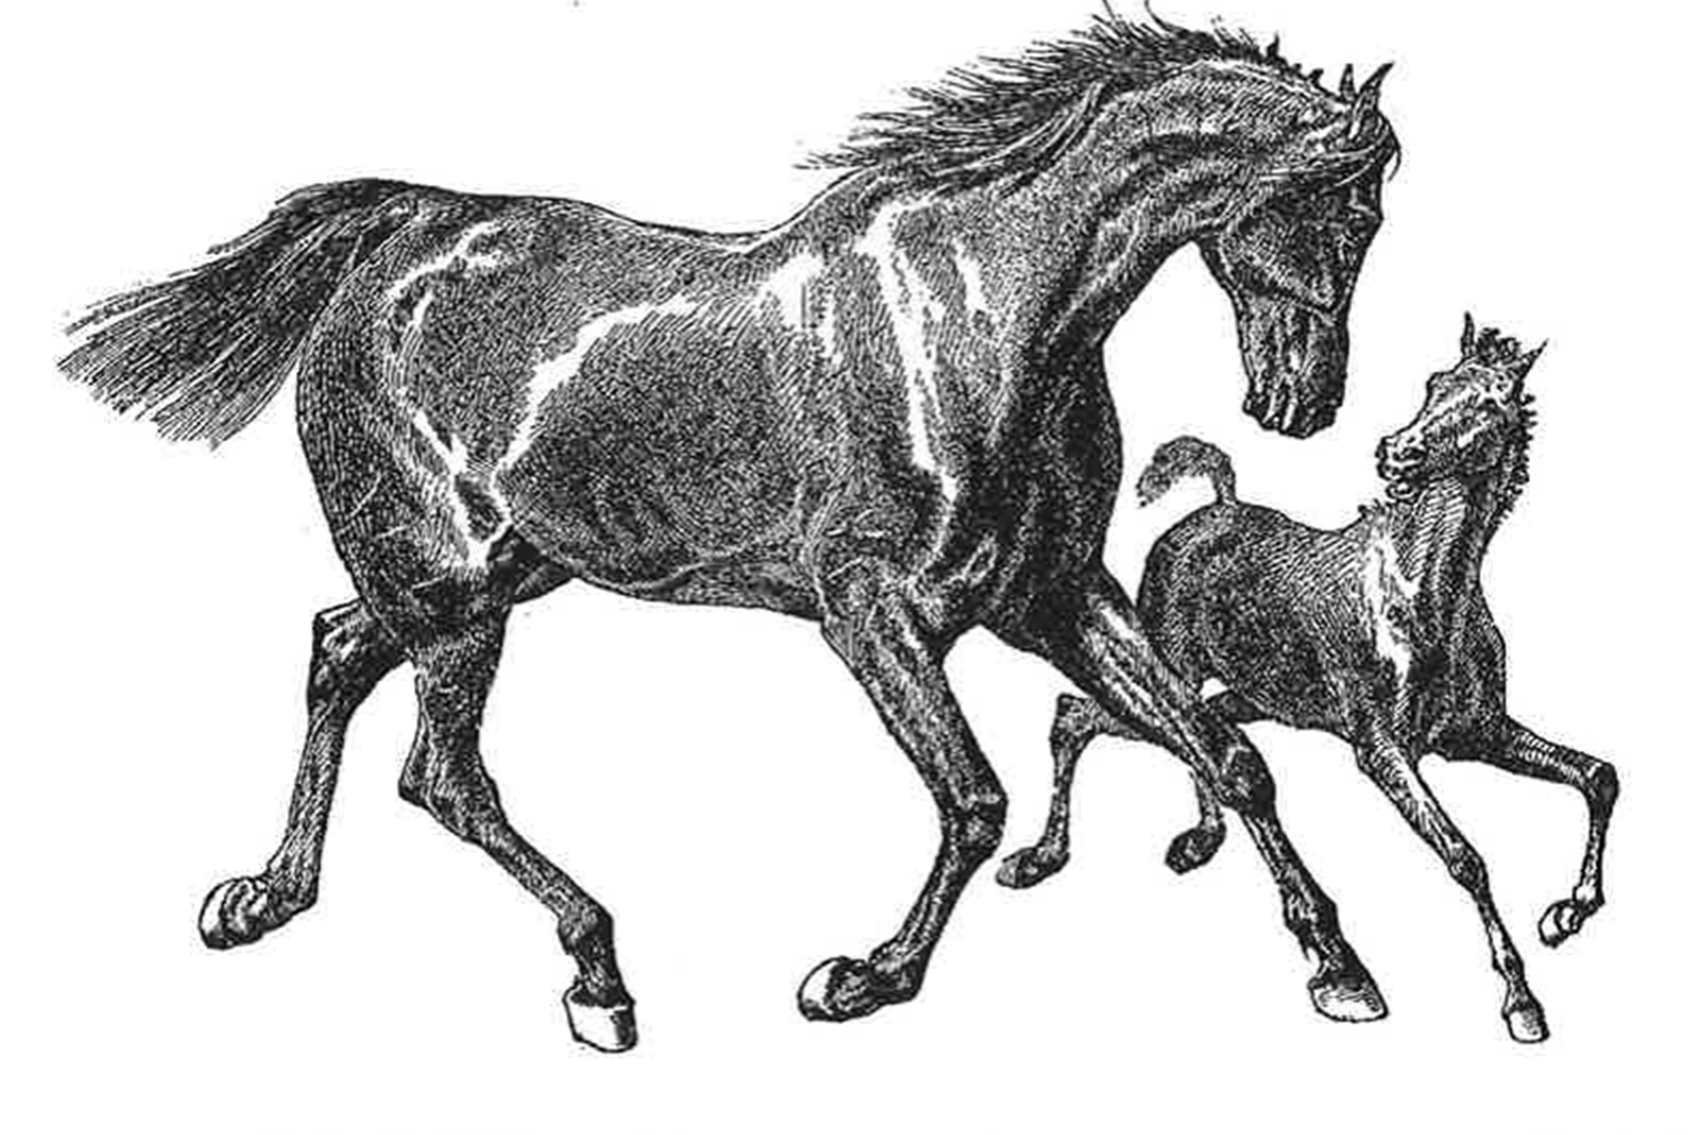 Picture of Horses